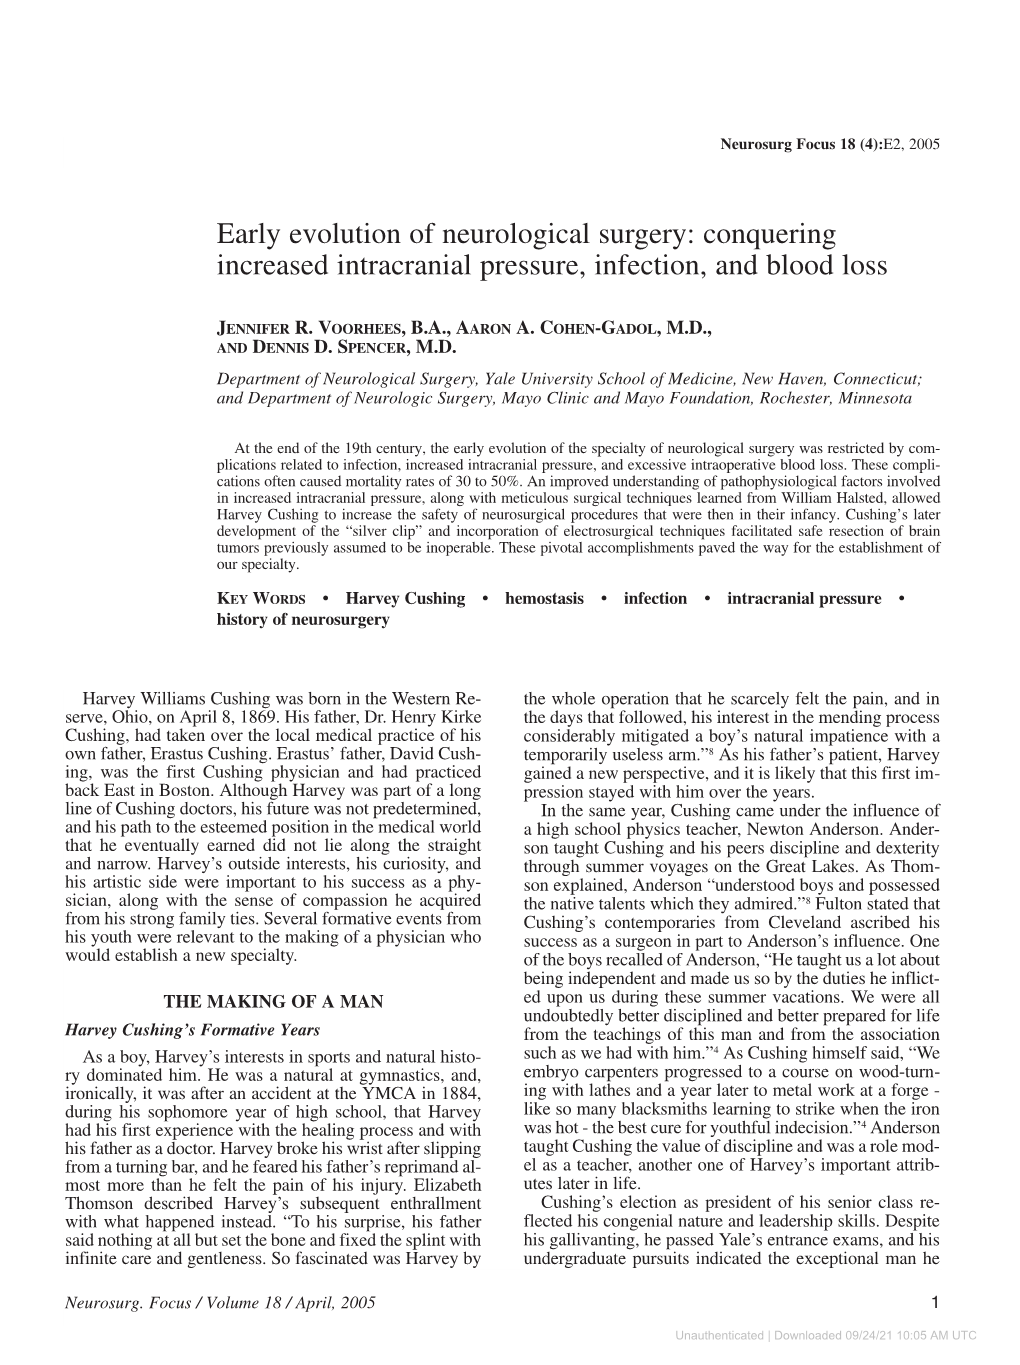 Early Evolution of Neurological Surgery: Conquering Increased Intracranial Pressure, Infection, and Blood Loss